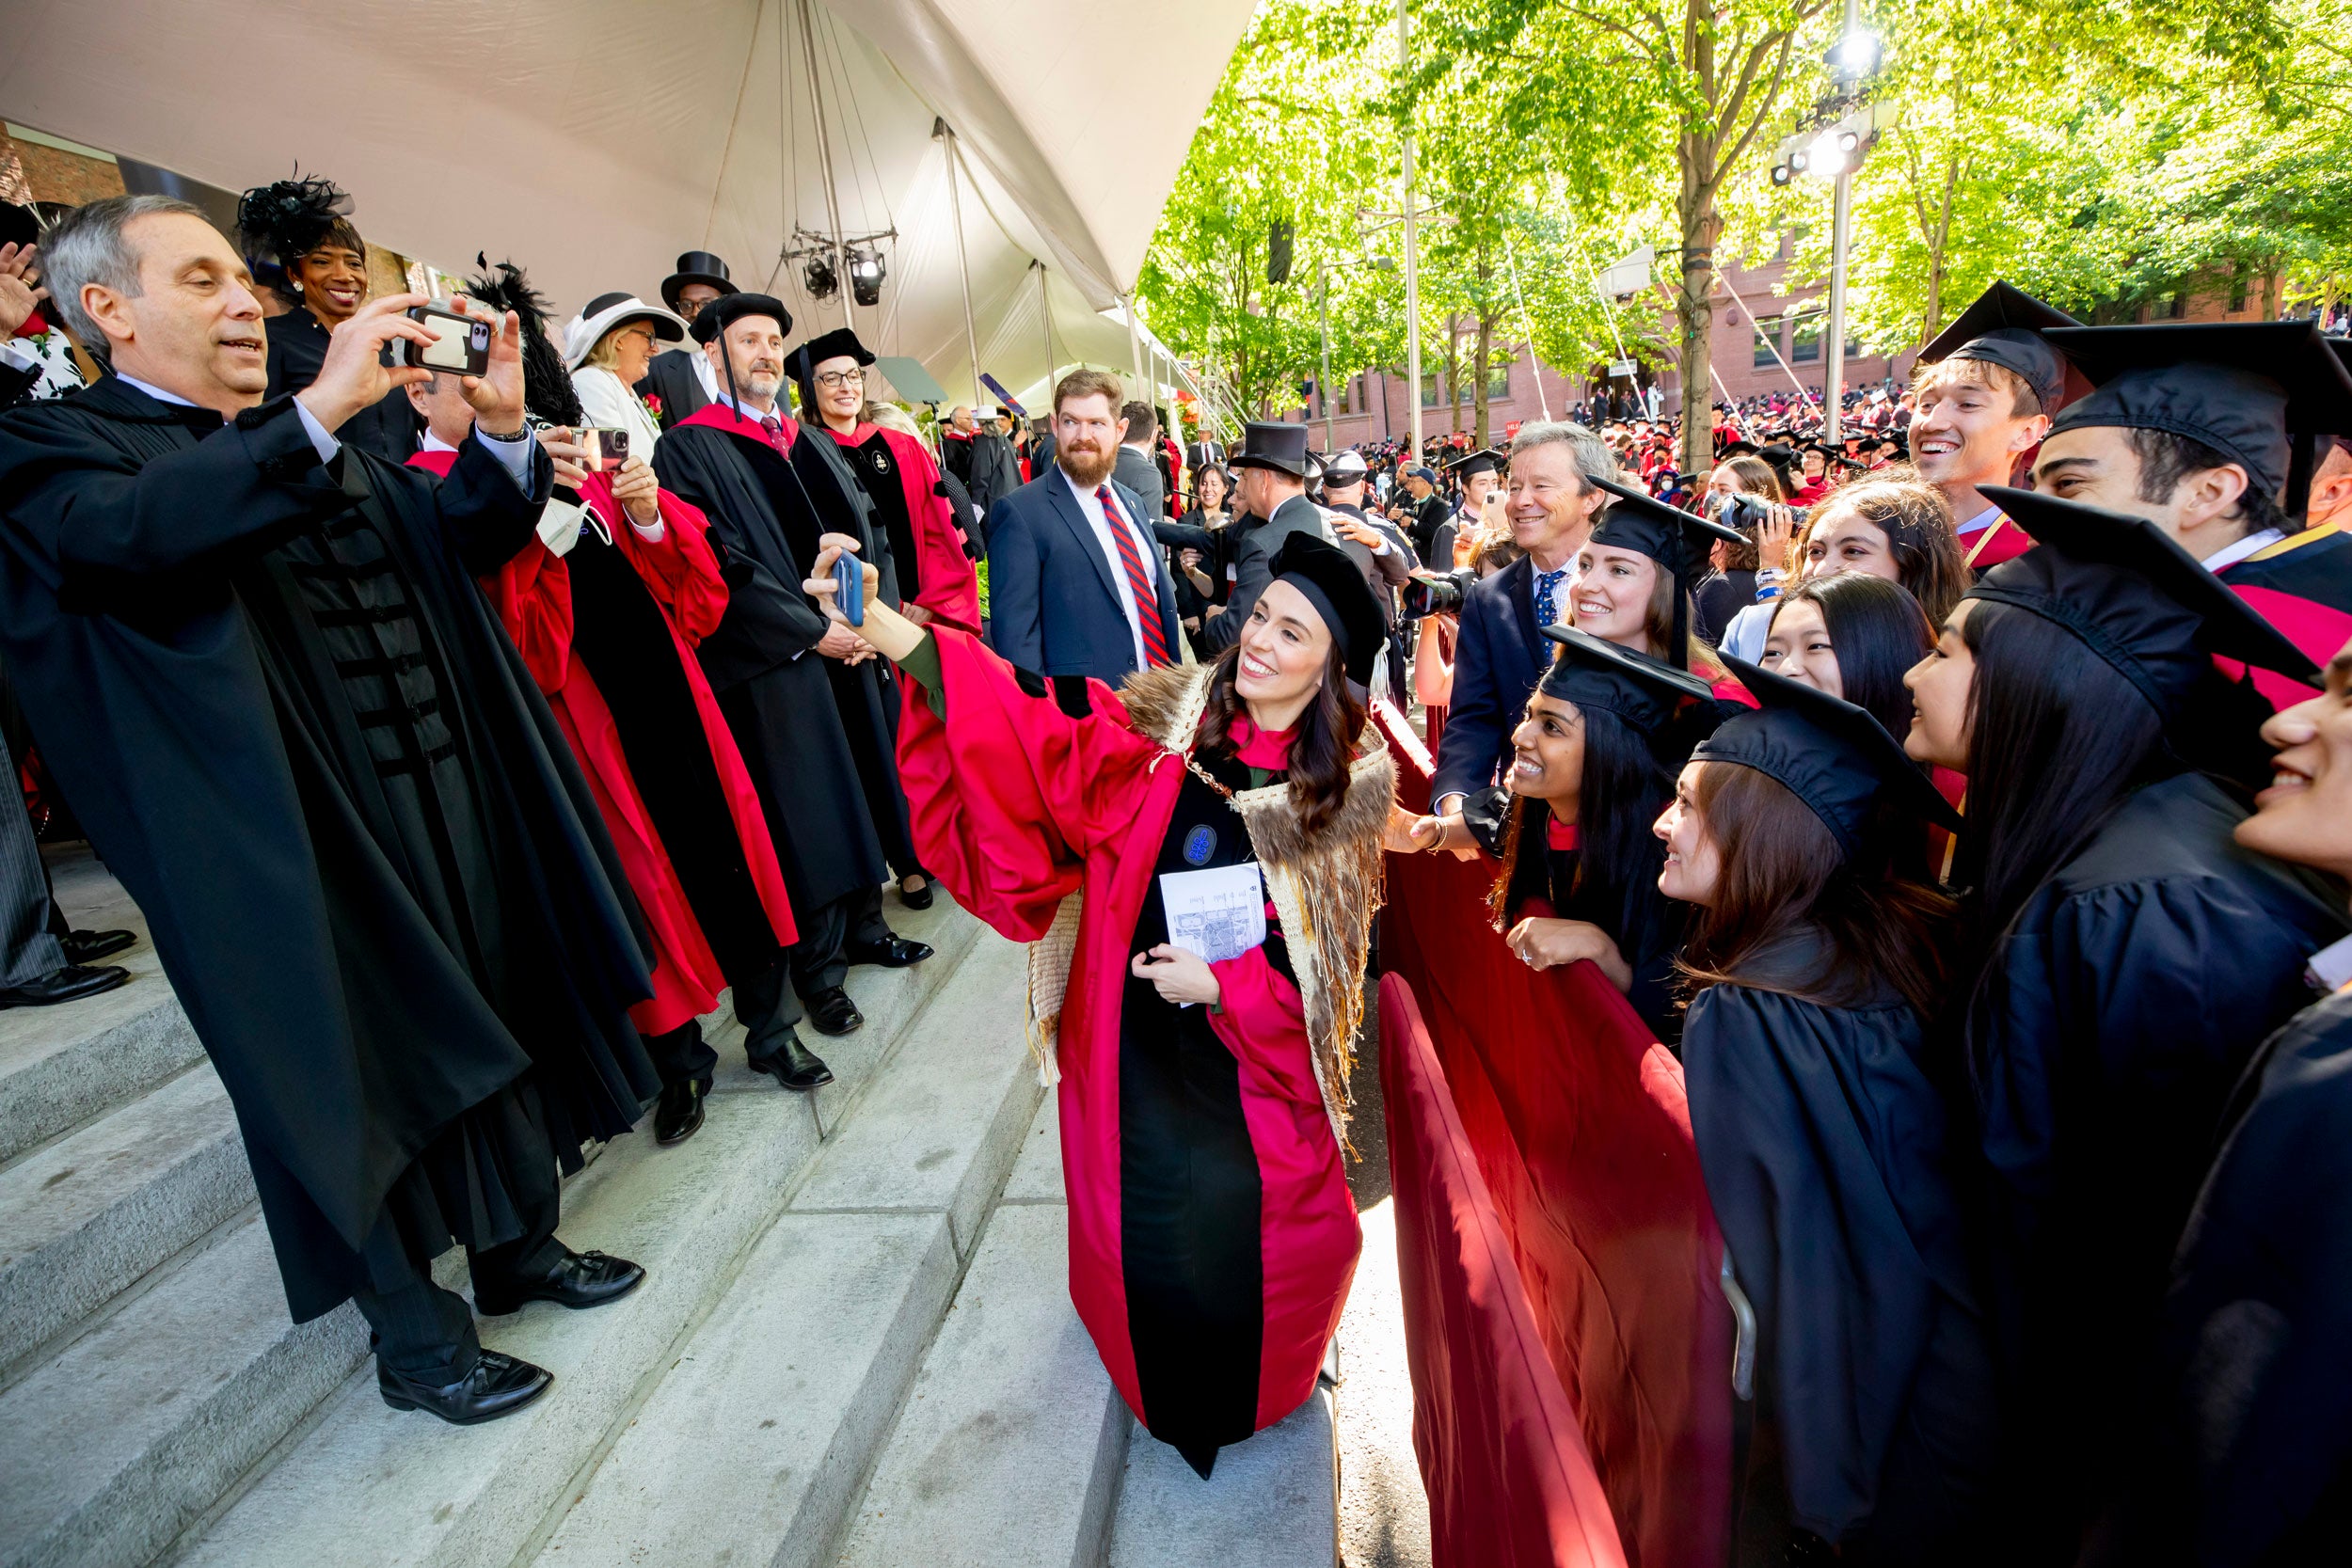 Harvard University President Larry Bacow and New Zealand Prime Minister Jacinda Ardern take photos with graduates before the ceremony begins.